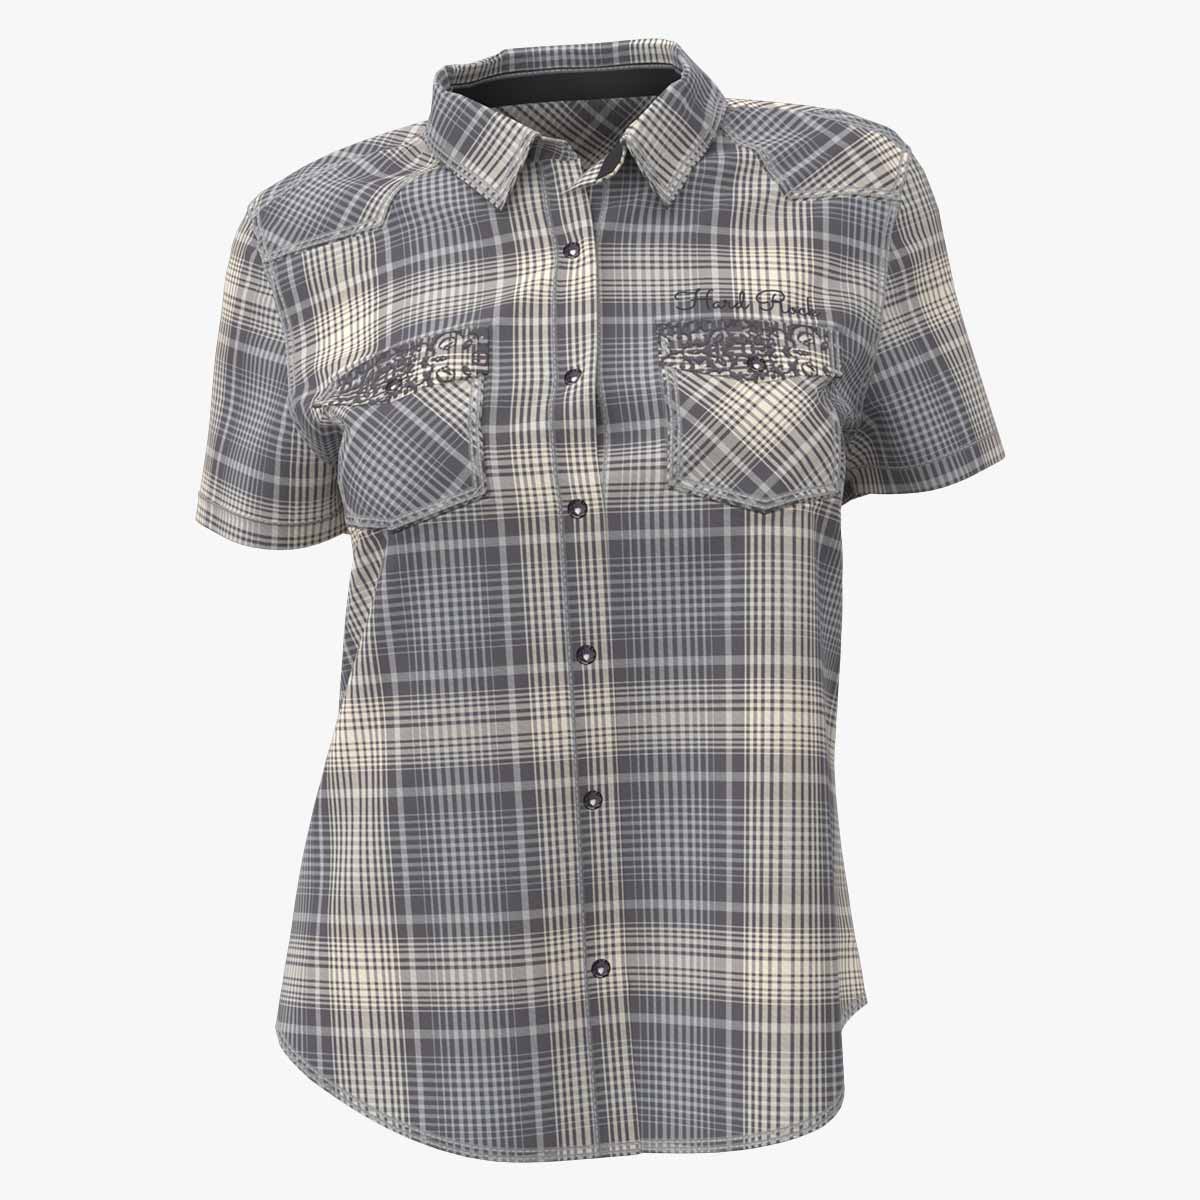 Guitar Company Plaid Shirt with Back Design image number 1